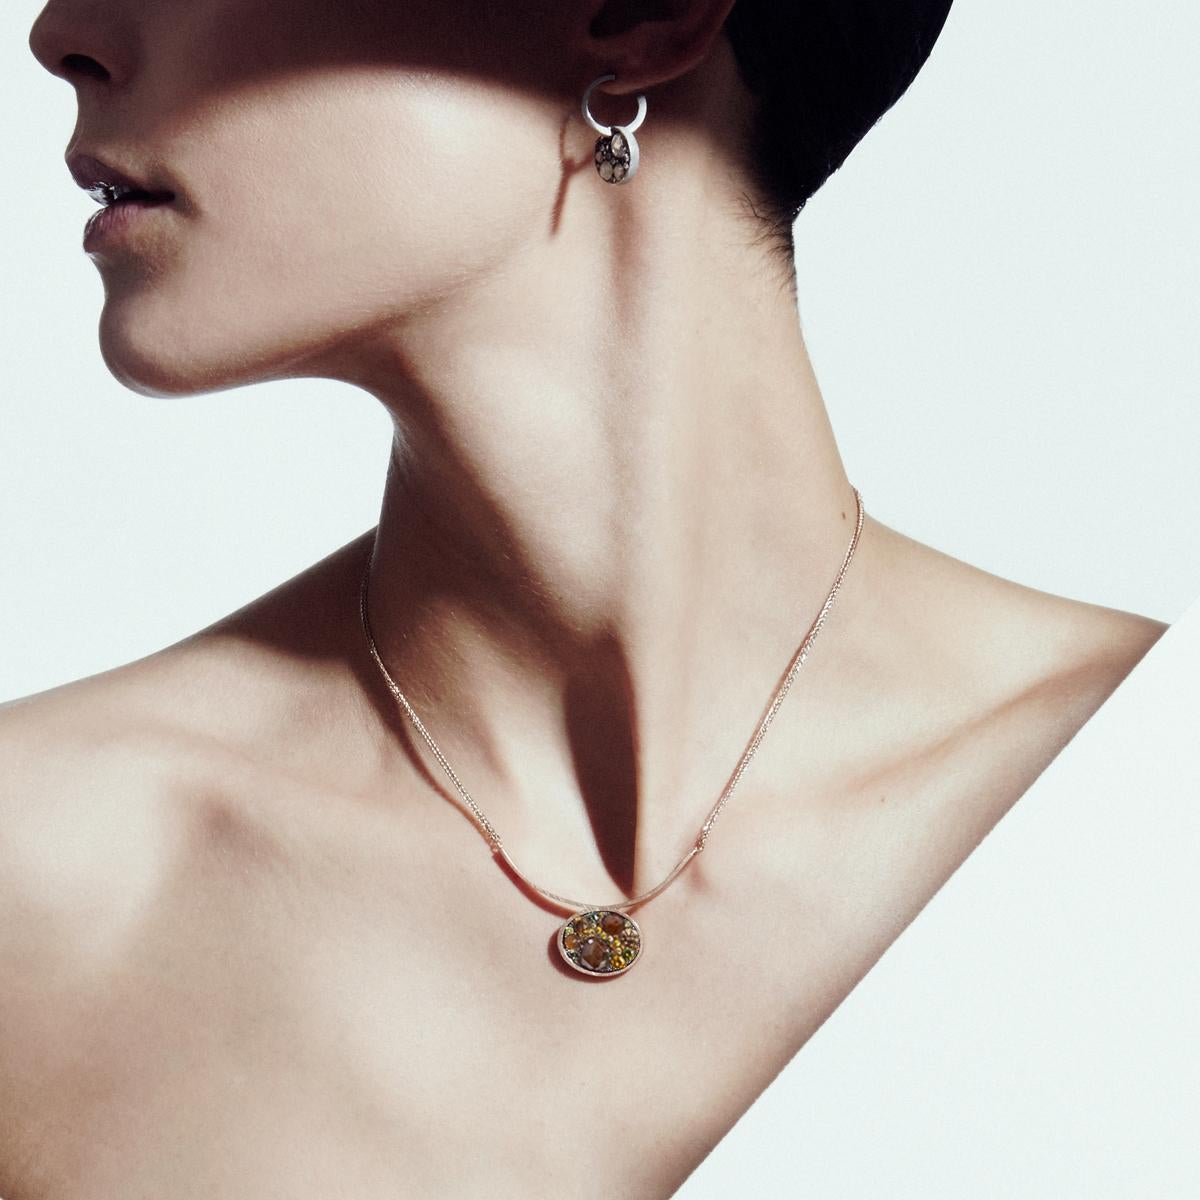 Pendant with neclace, handmade in Belgium in 18kt red gold 7,6 g and blackened sterling silver ( the stonesetting is made in blackened sterlingsilver to create a black background for the stones)  Natural coloured blue, brown; yellow & cognac